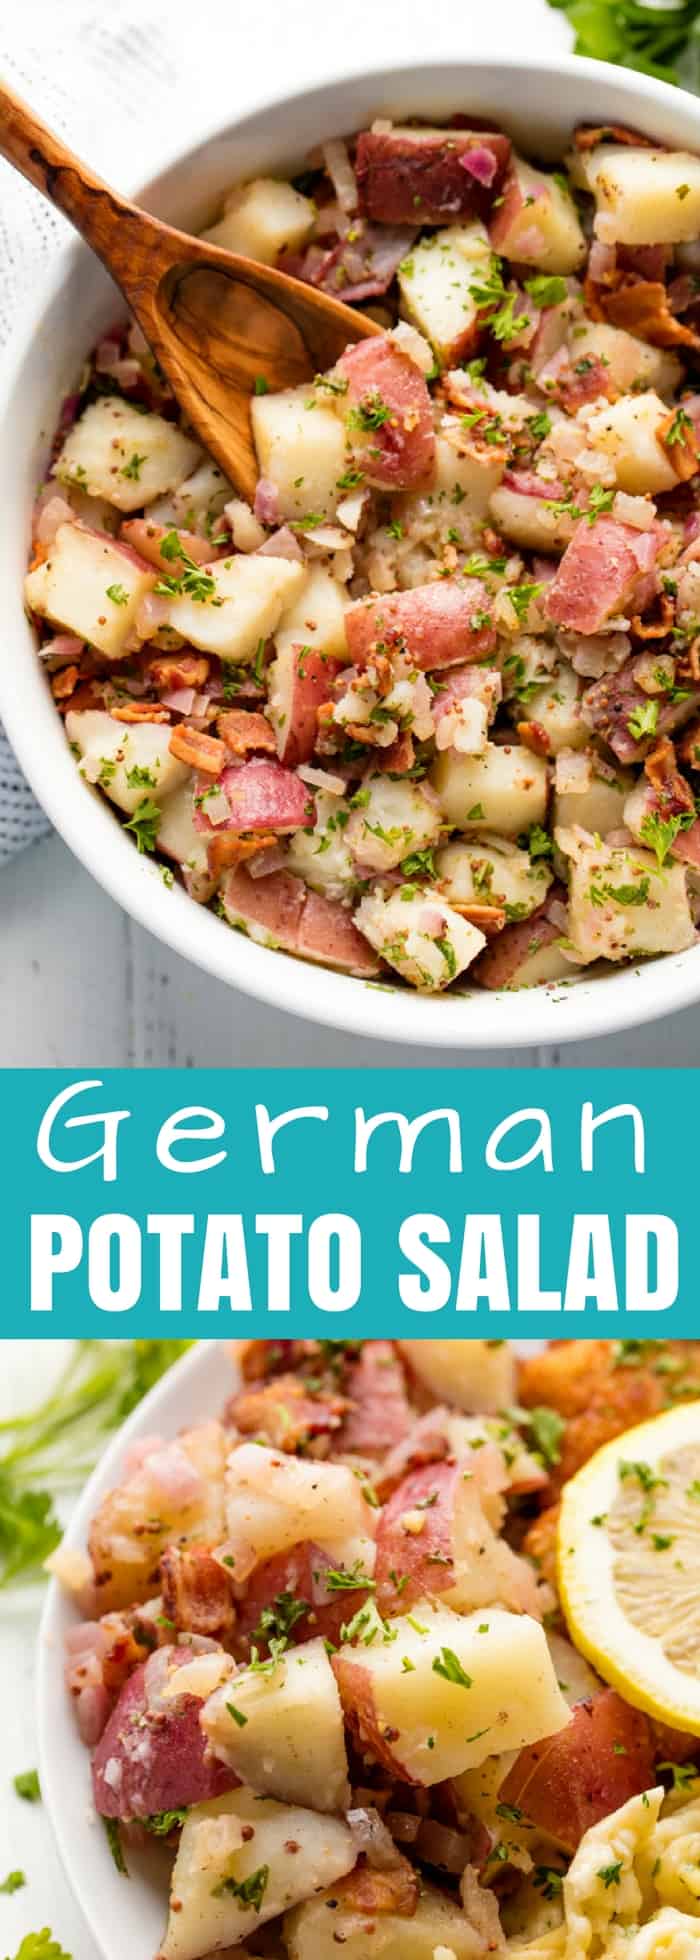 Old Fashioned German Potato Salad is dressed with a dijon vinegar dressing and can be served either hot or cold. 